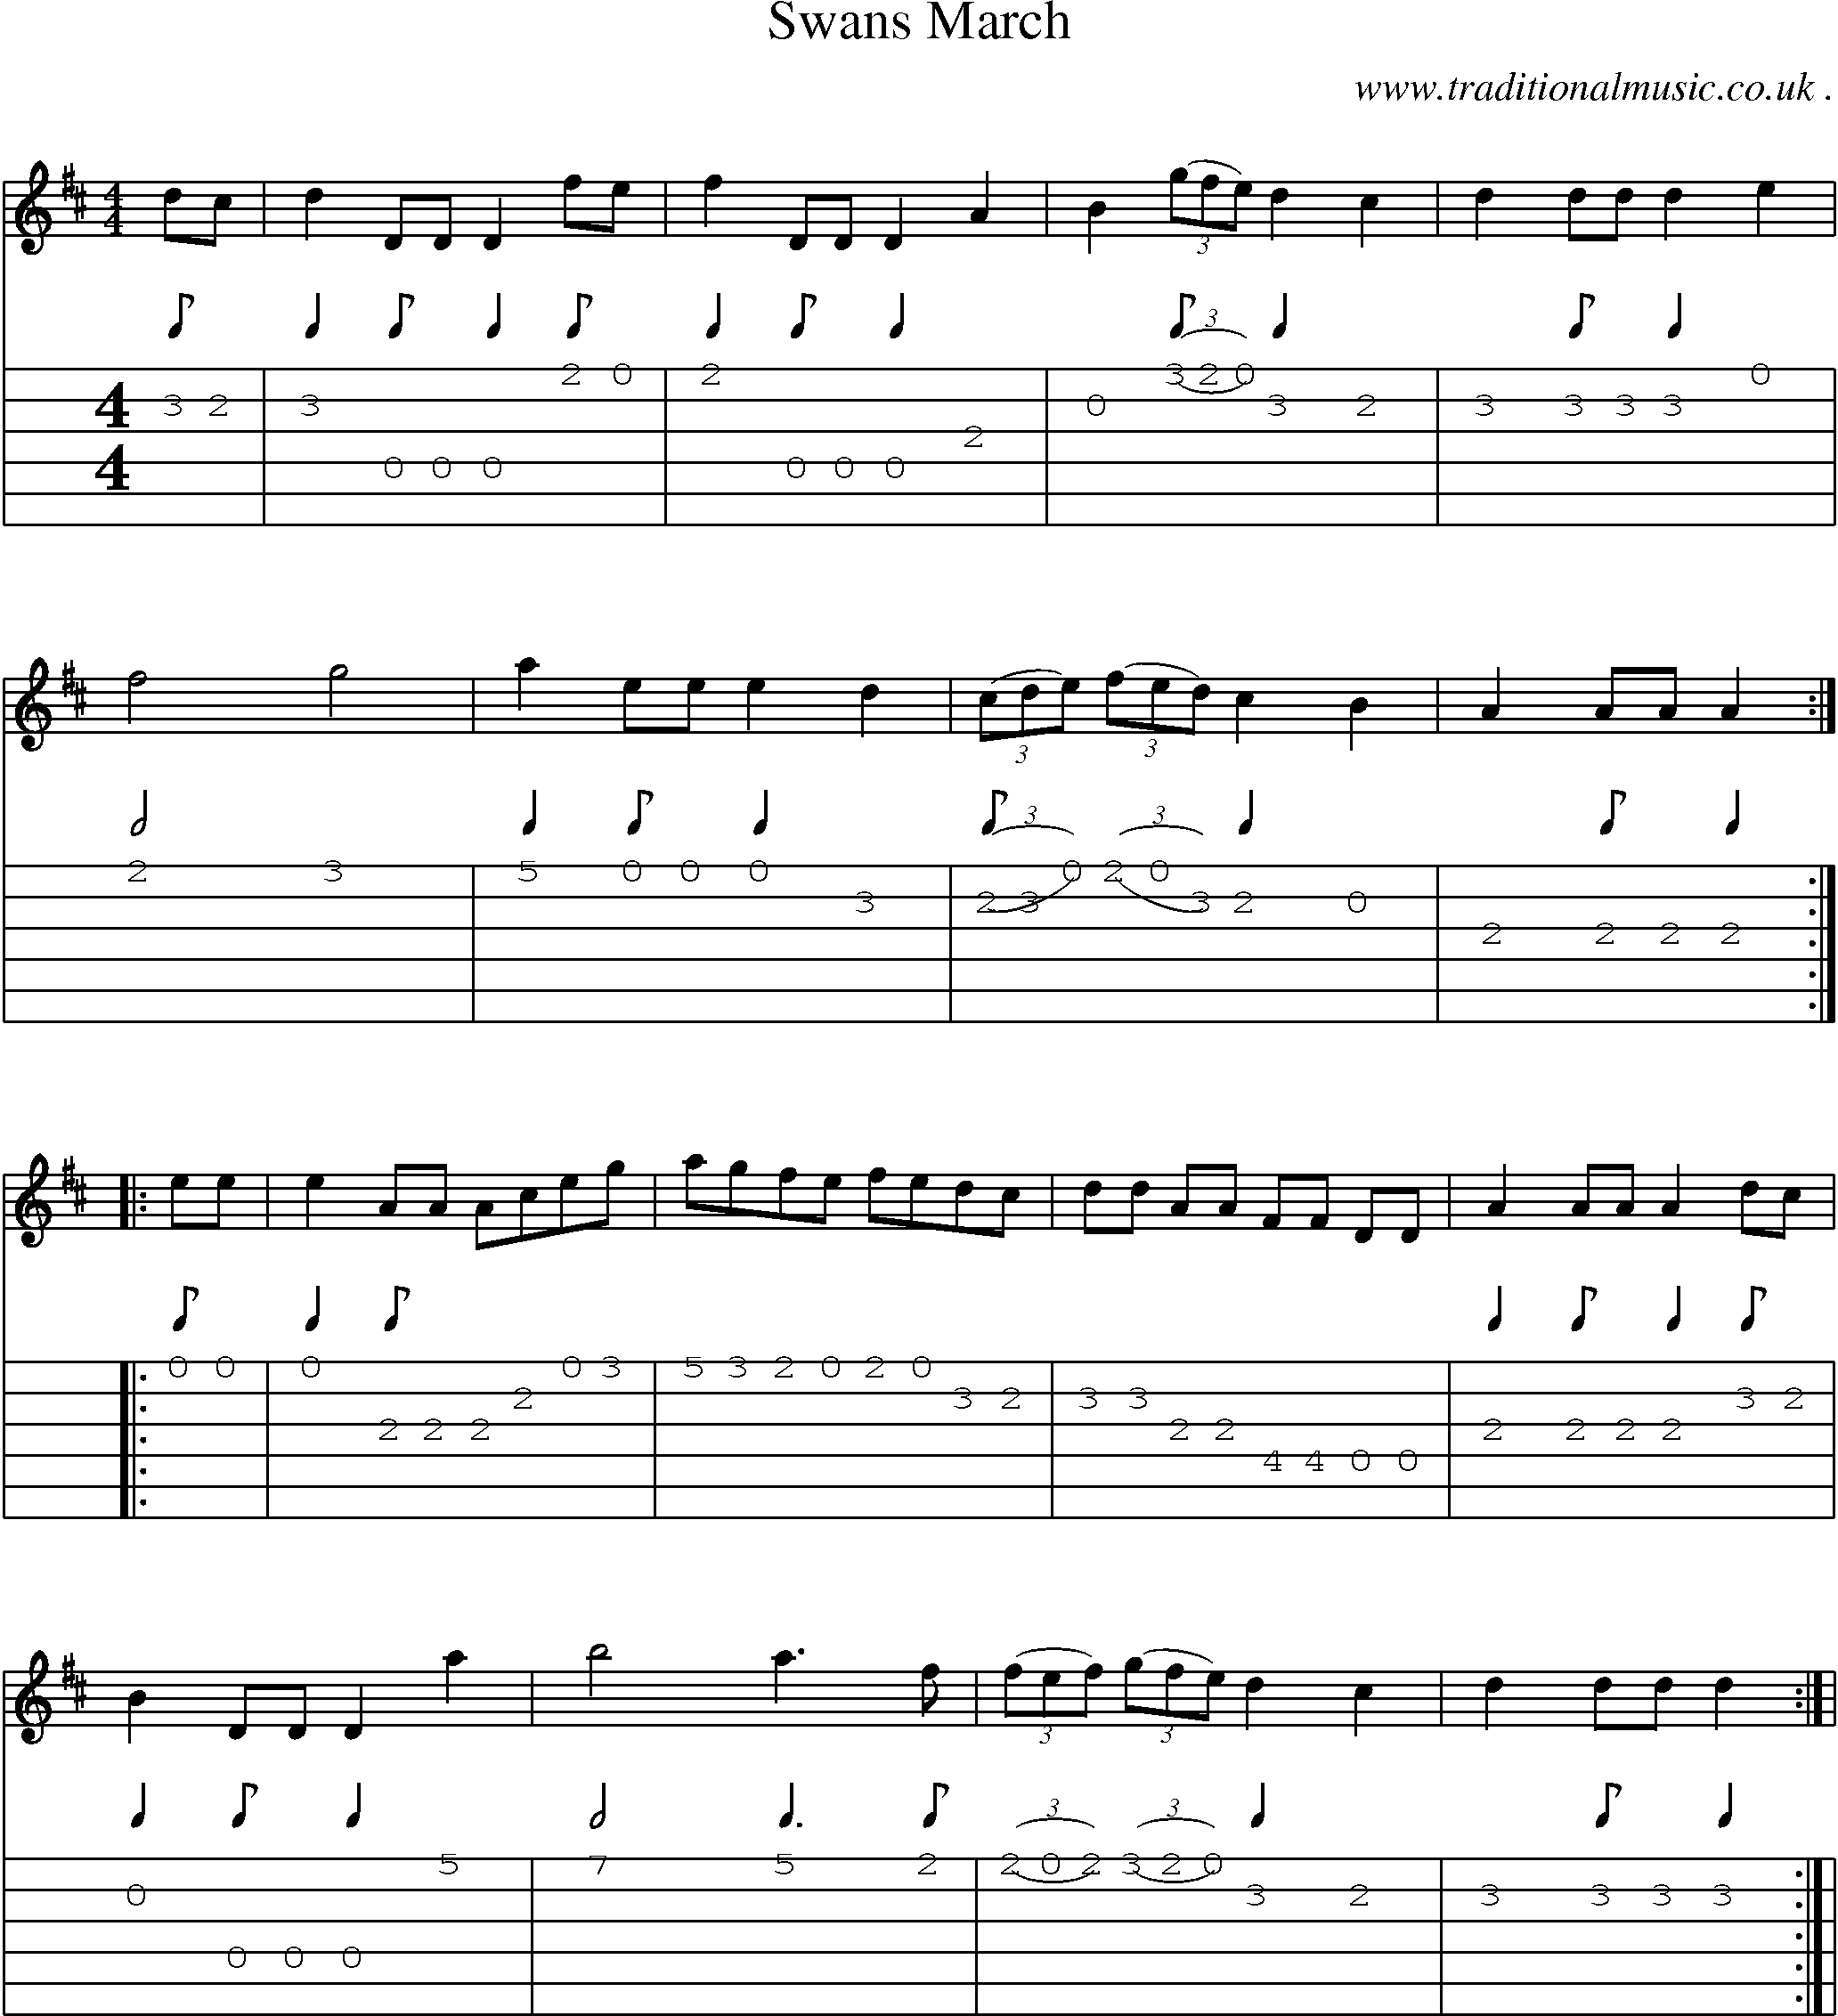 Sheet-Music and Guitar Tabs for Swans March